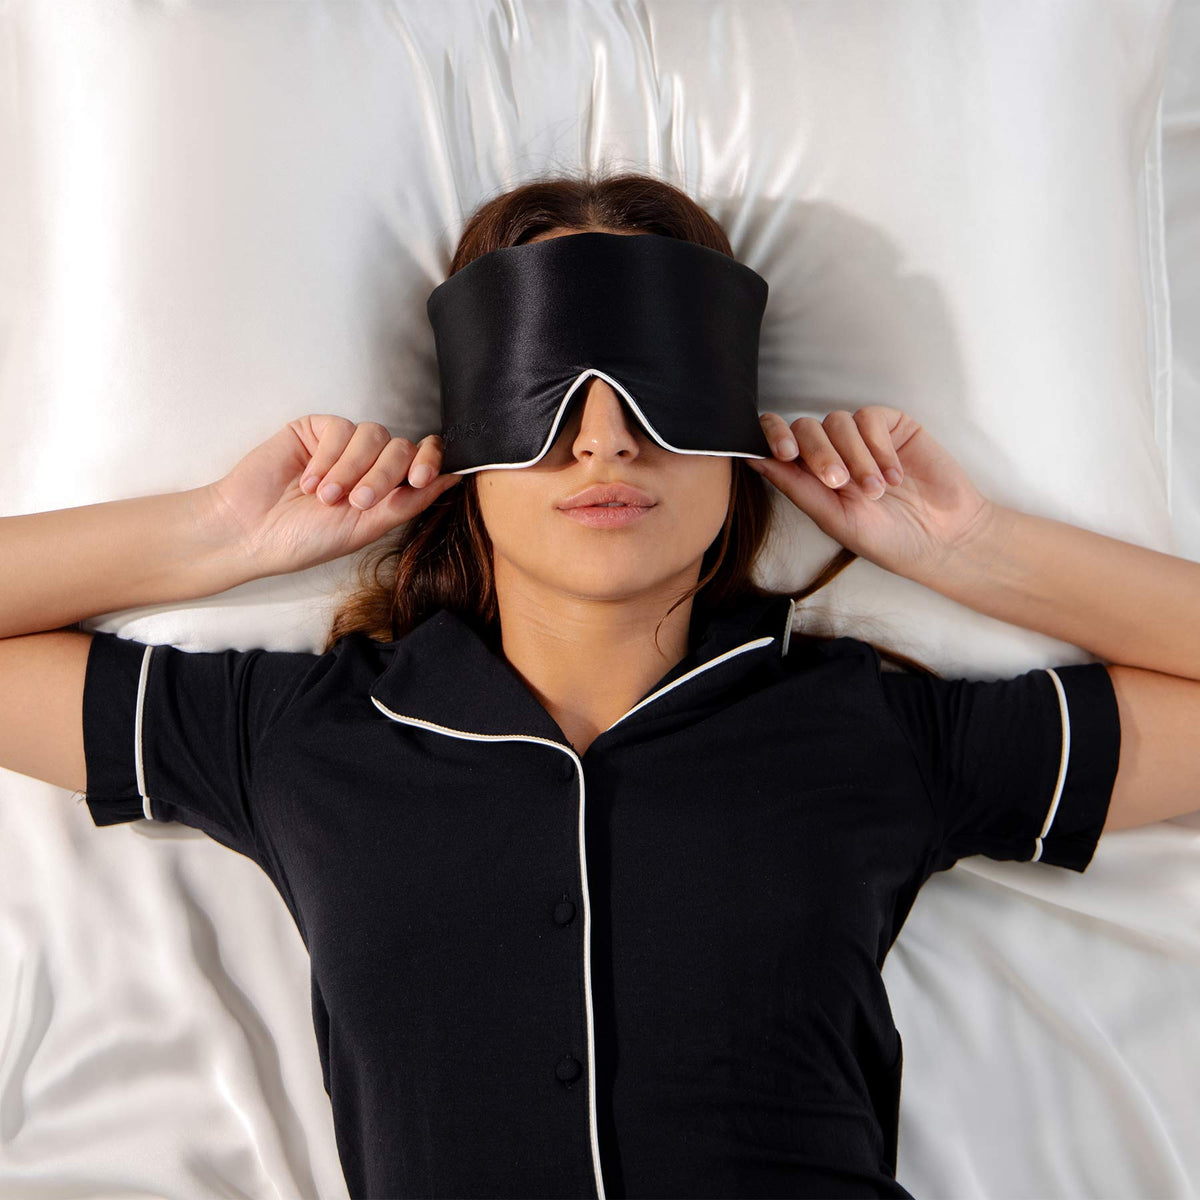 Model with black coloured Drowsy sleep mask covering eyes on white silk sheets